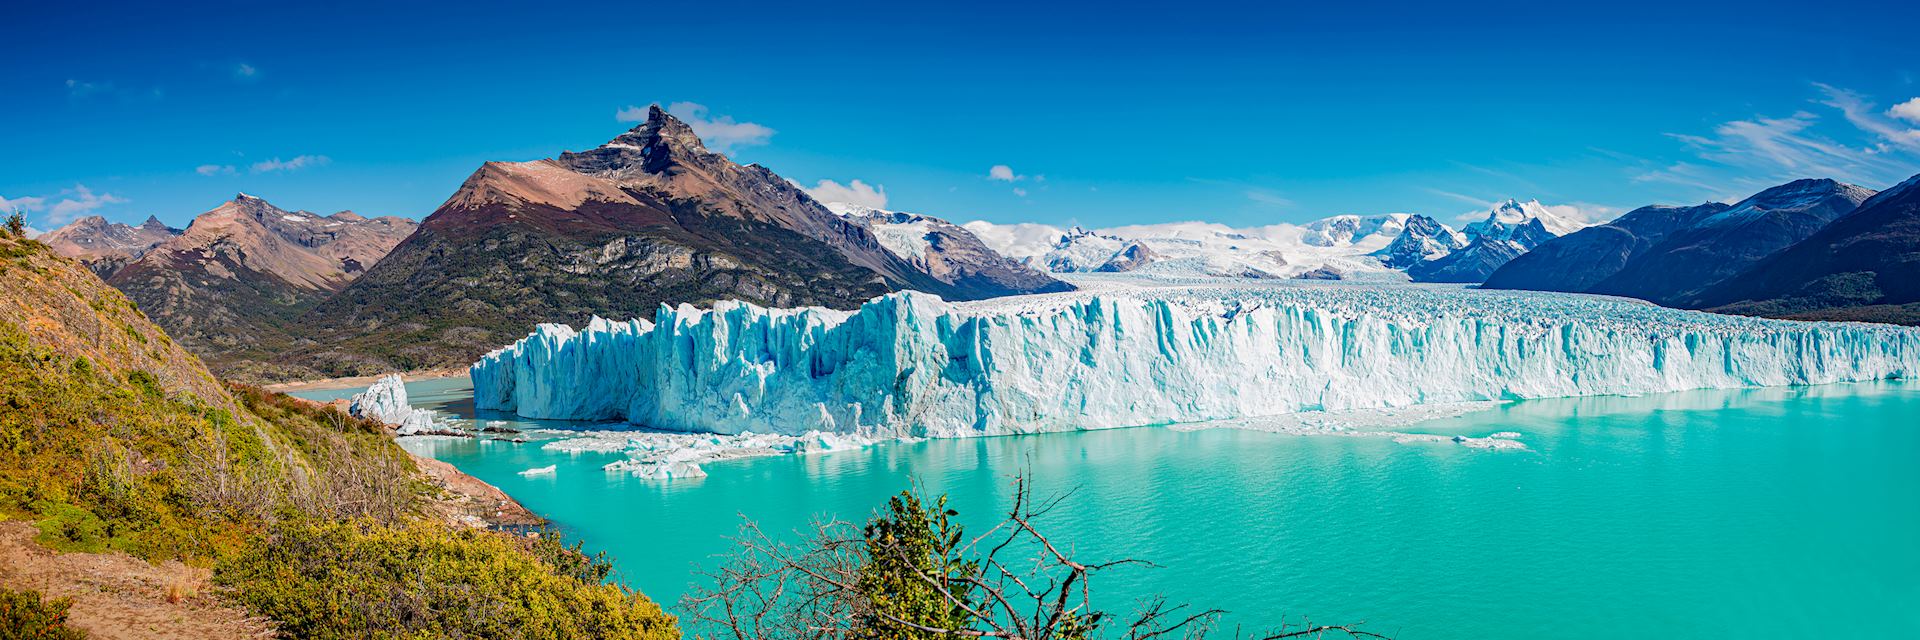 Patagonia: Chile or Argentina?, Travel guide